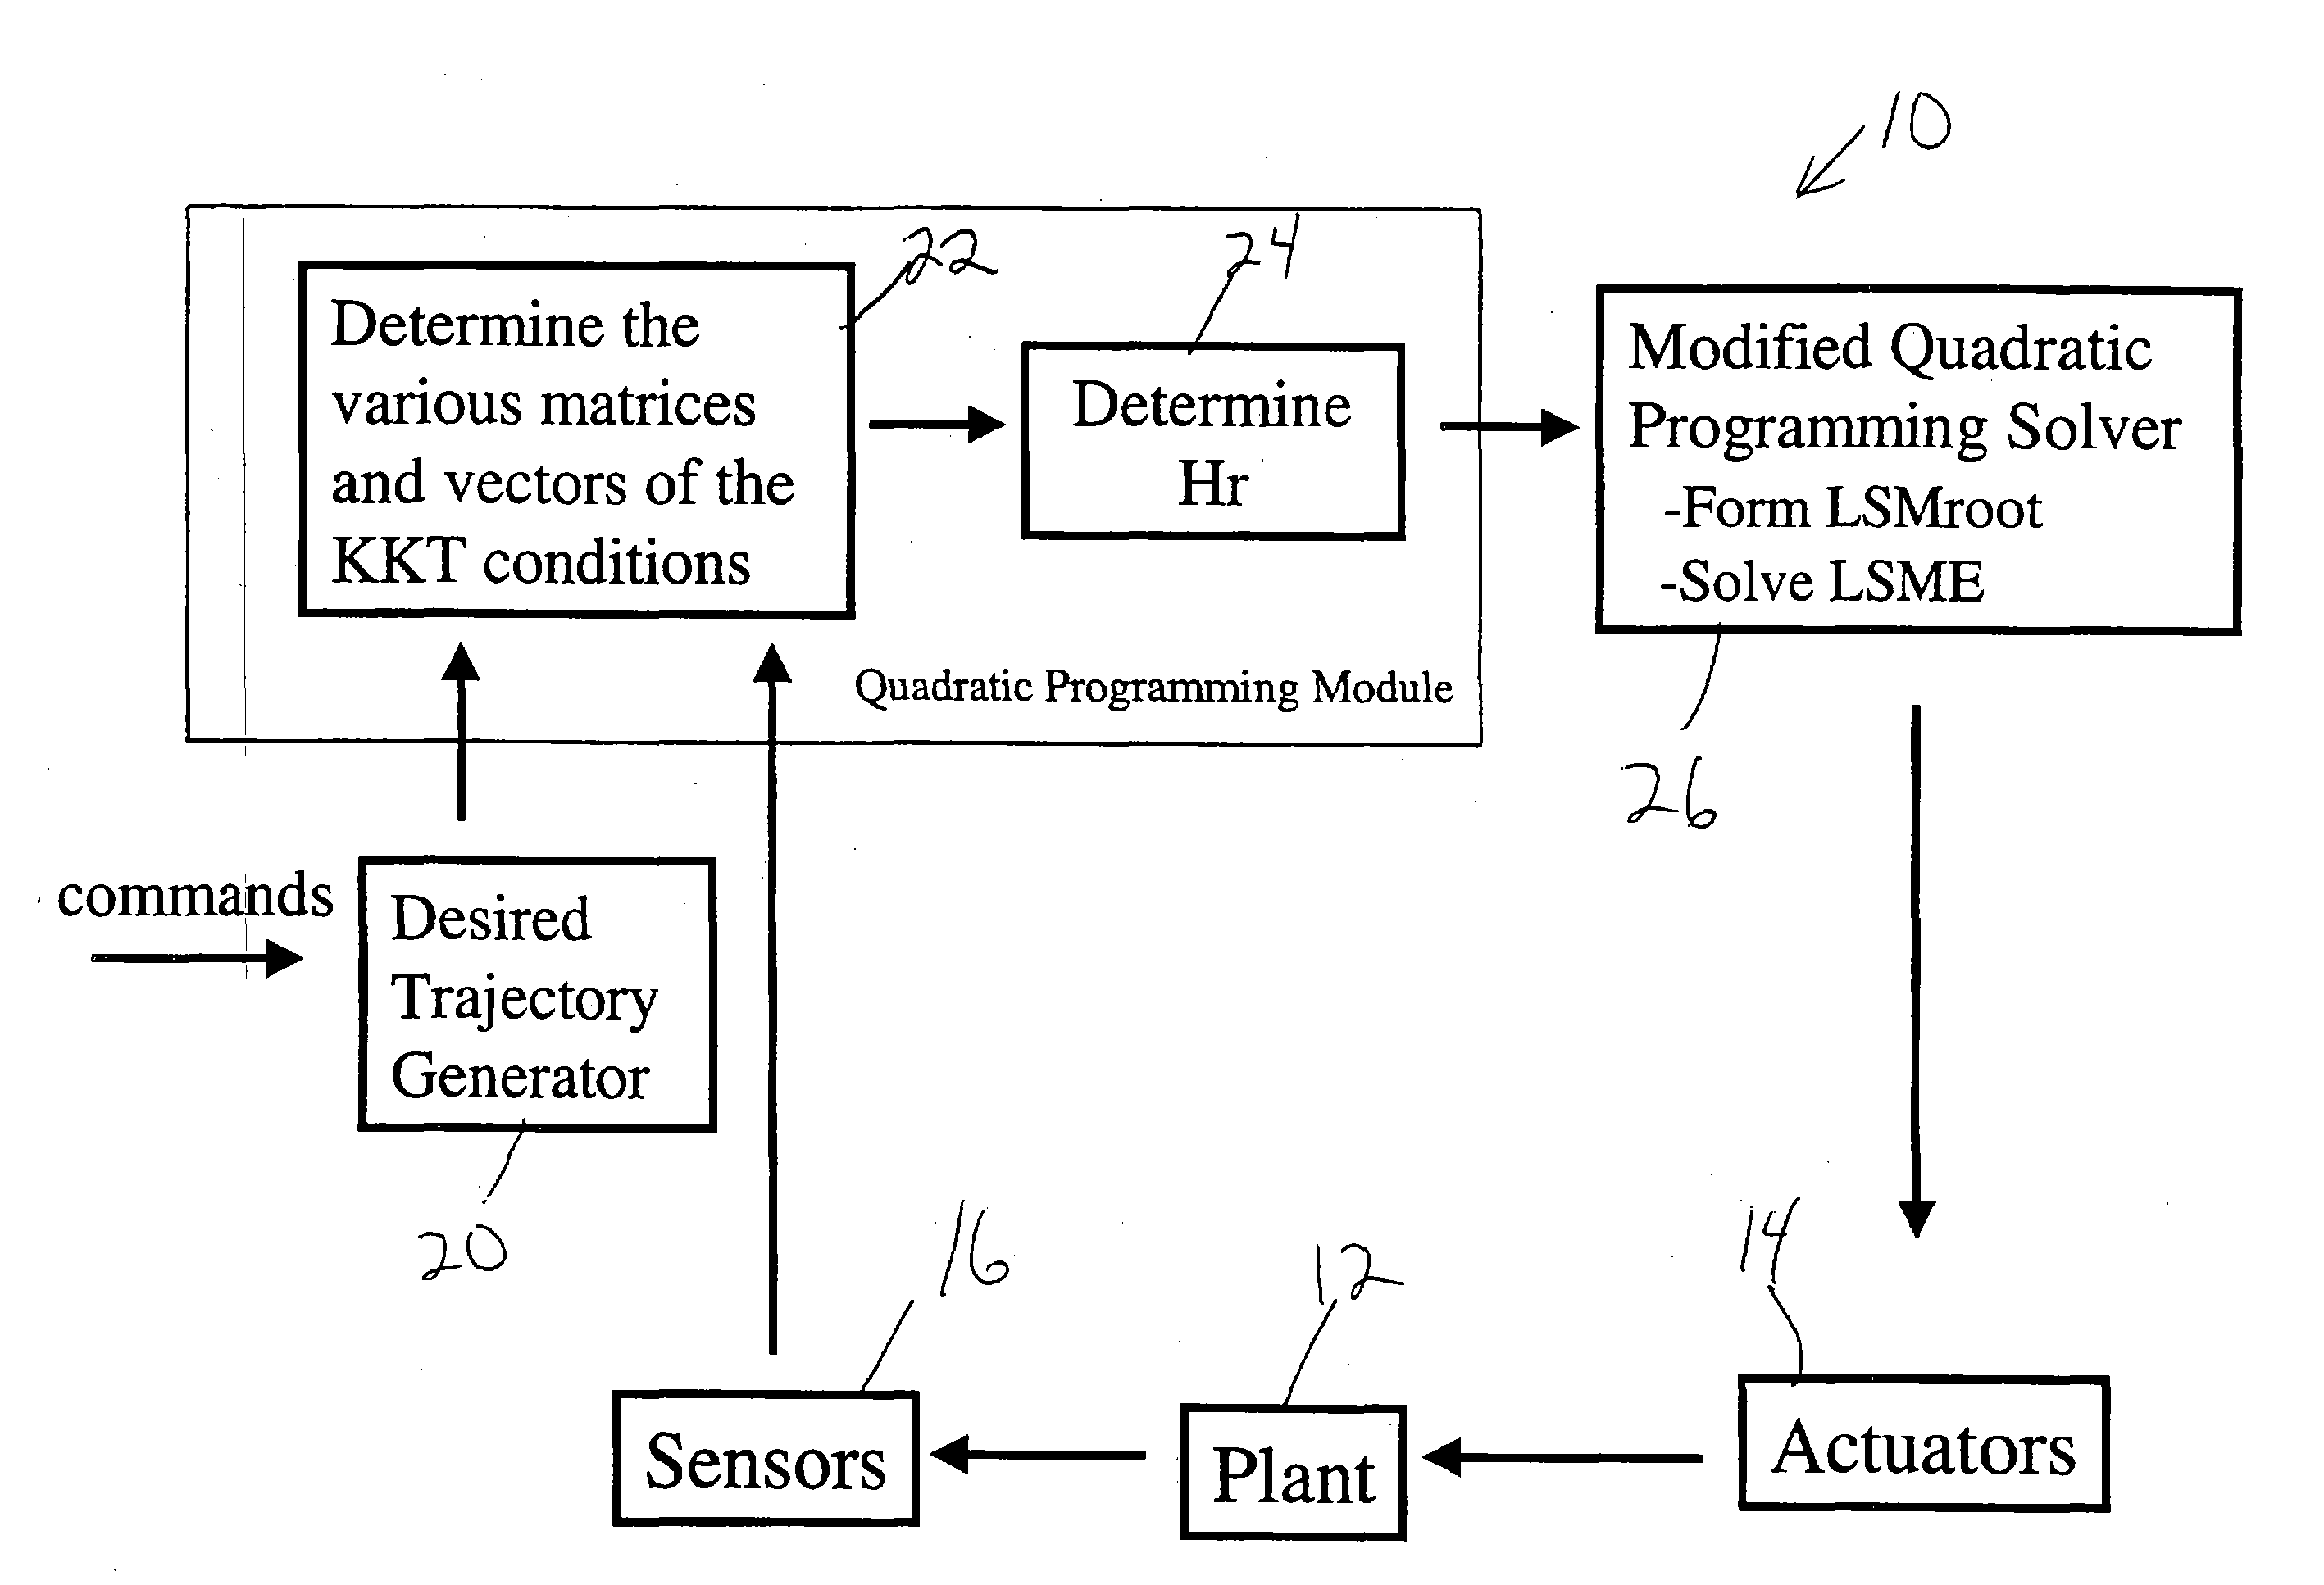 Square root method for computationally efficient model predictive control